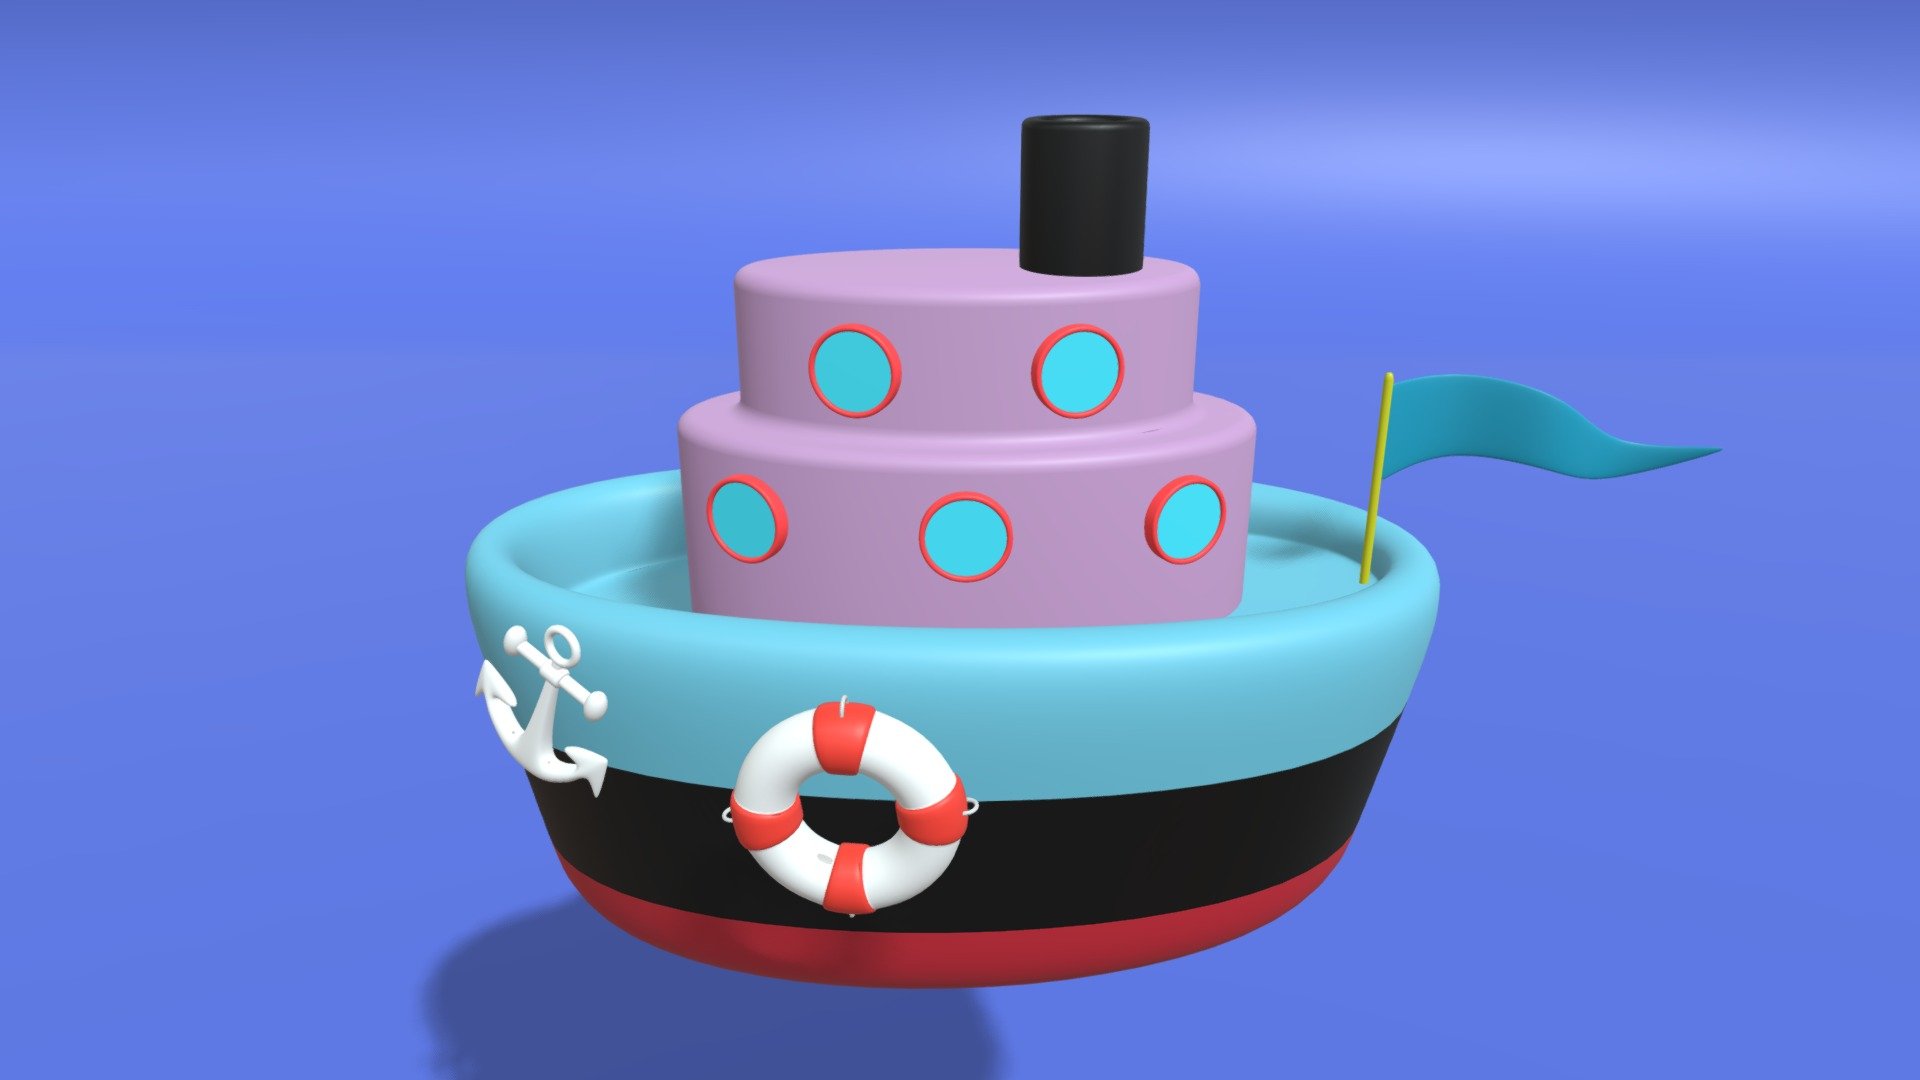 -Cartoon Cute Ship Boat.

-Contains 17 objects.

-Verts : 29,418 Faces : 28,566.

-Materials have the correct names.

-This product was created in Blender 2.8.

-Formats: blend, fbx, obj, c4d, dae, abc, stl, glb,unitypackage.

-We hope you enjoy this model.

-Thank you 3d model